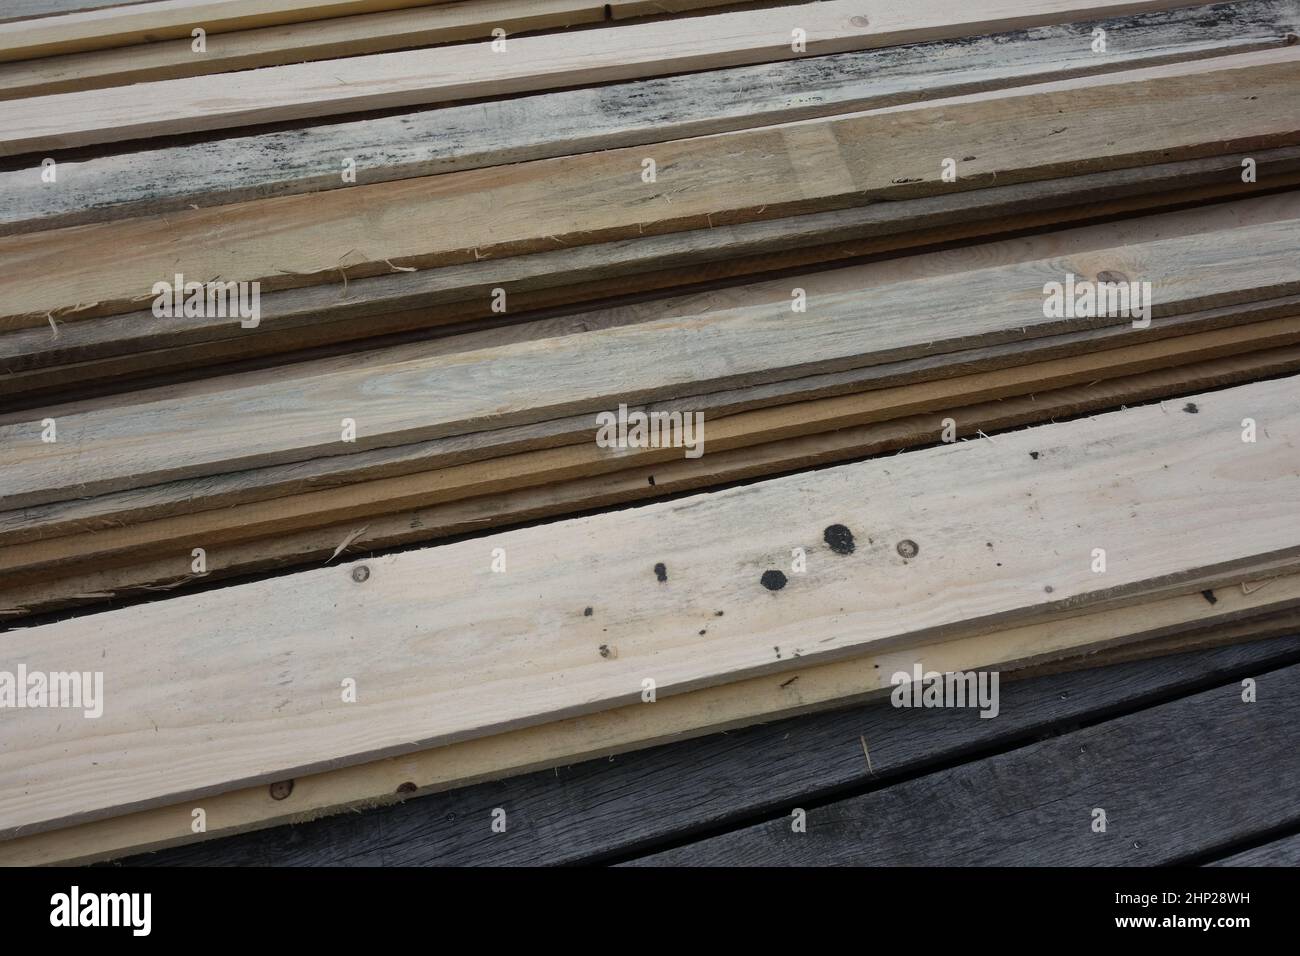 wood and timber as a resource used in the industrial production Stock Photo